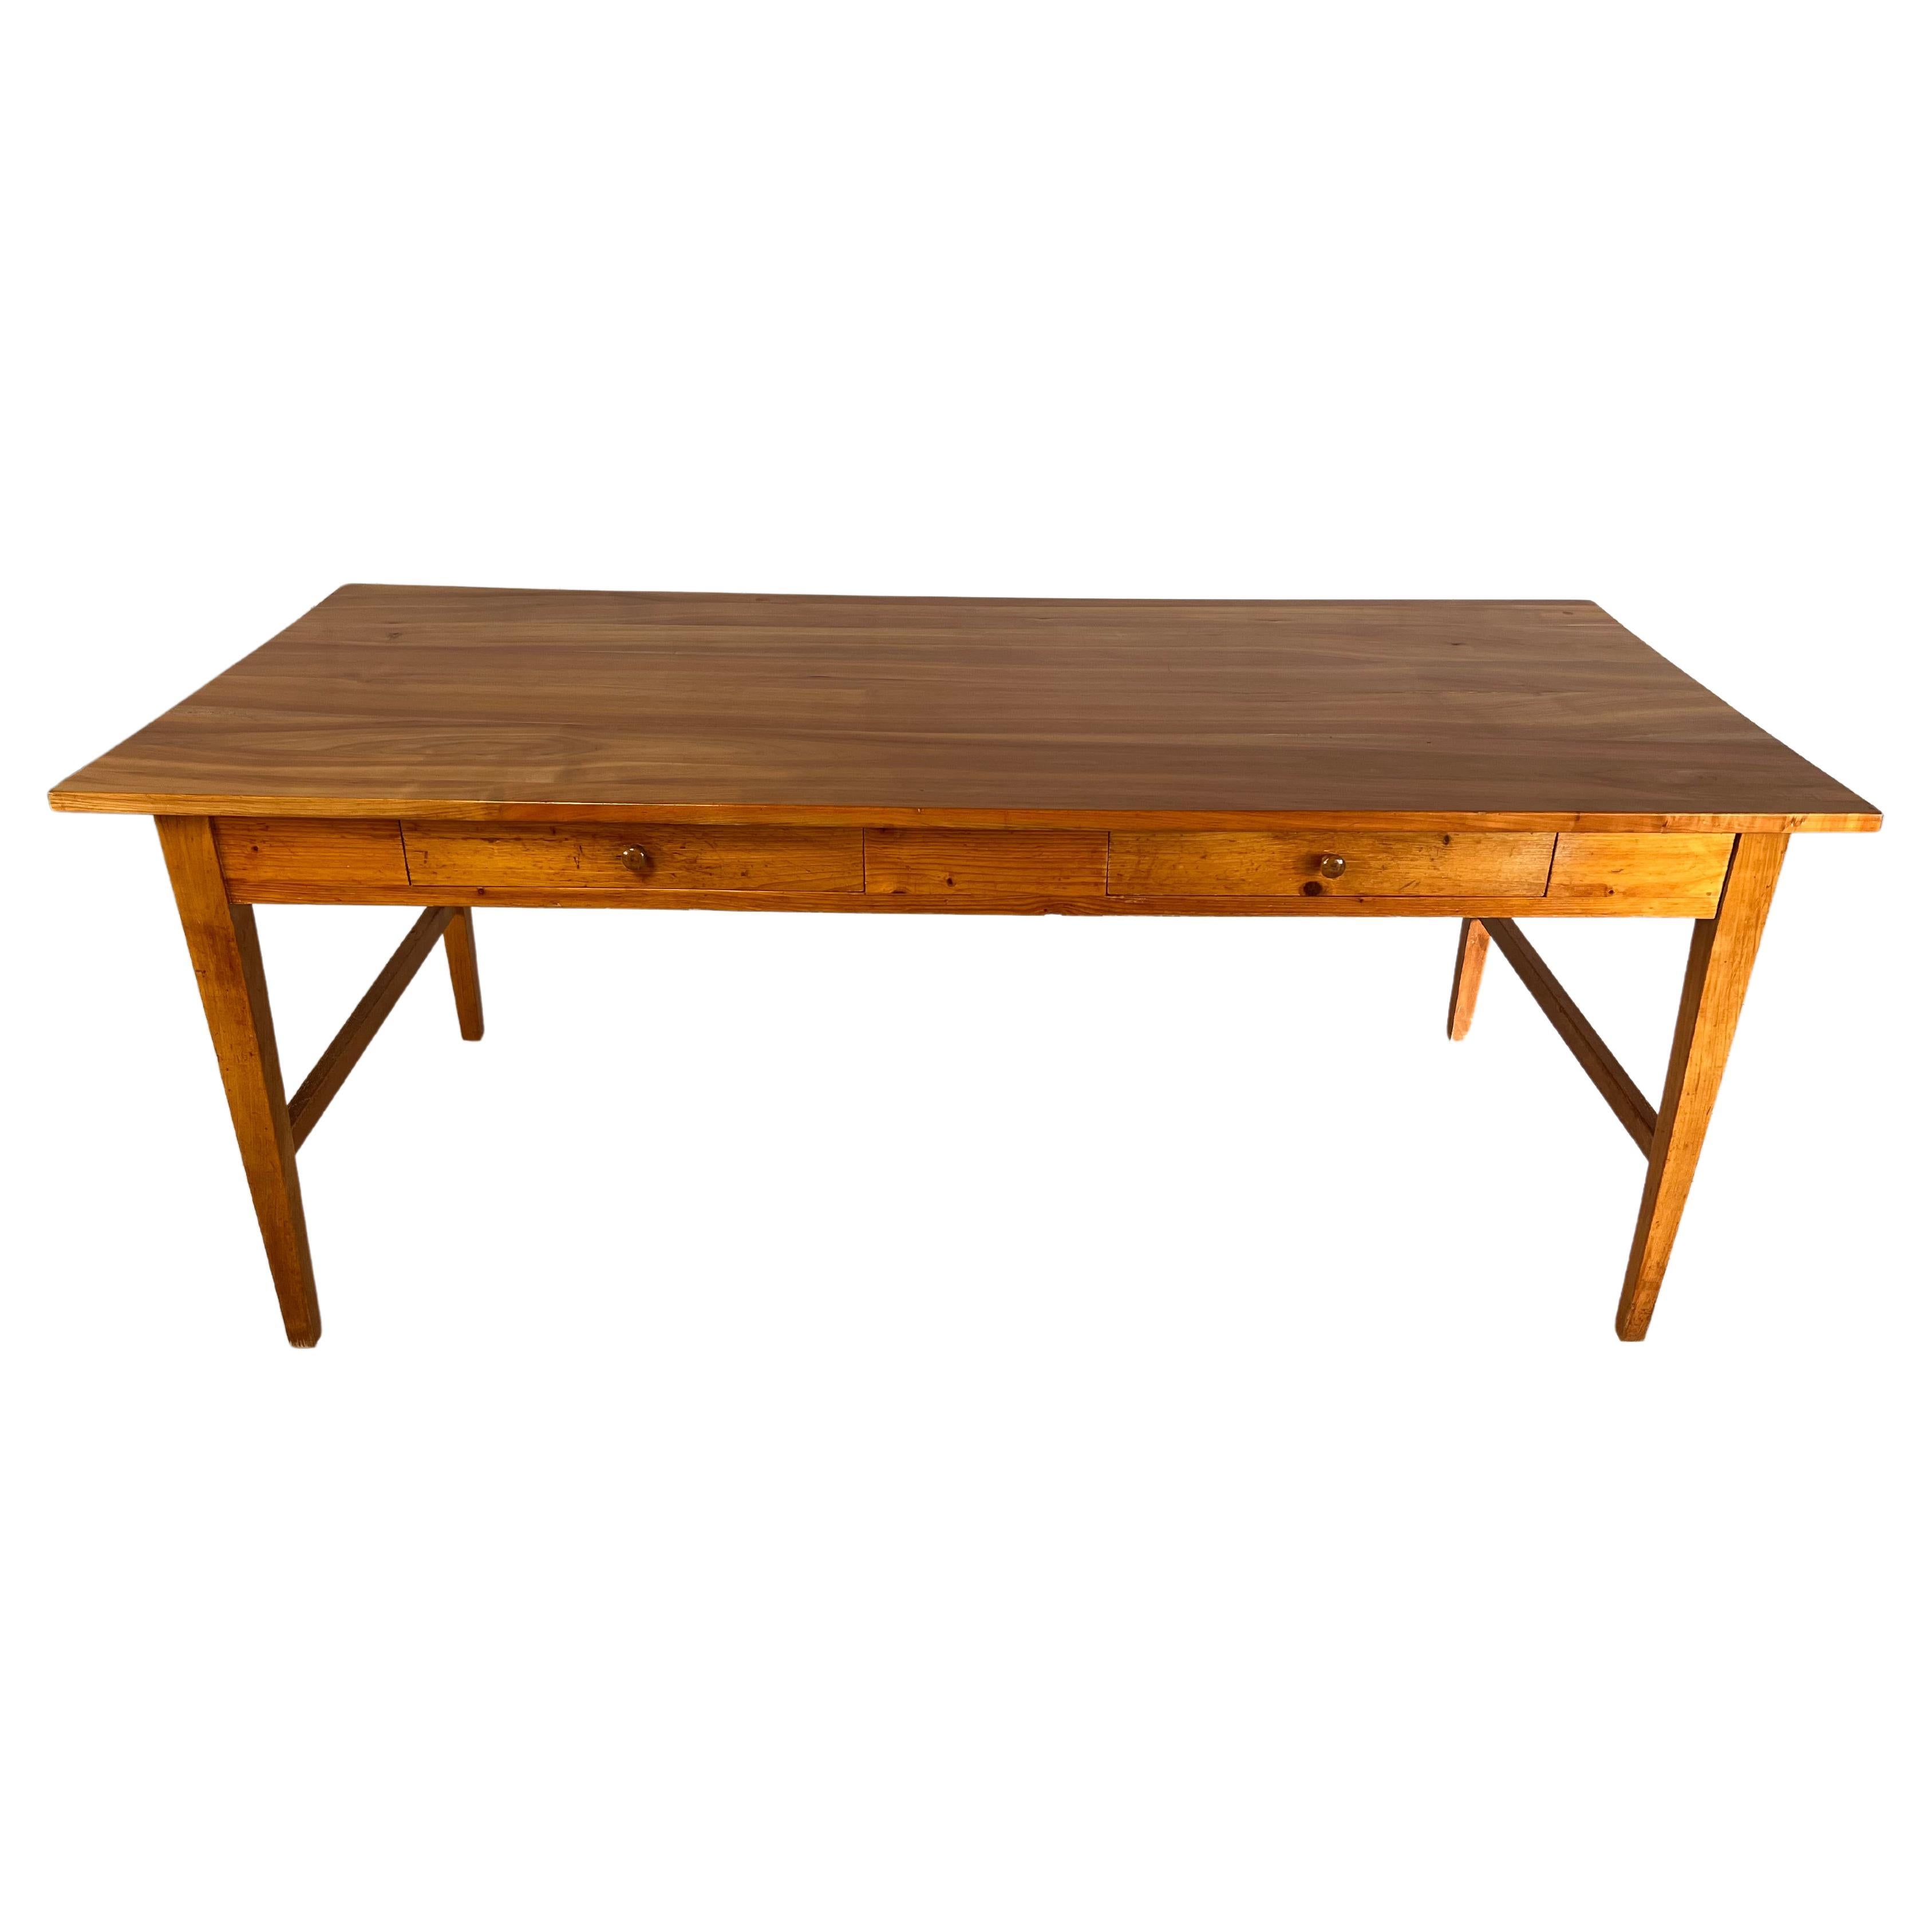 French Walnut Provincial Kitchen Dining Table With Two Storage Drawers